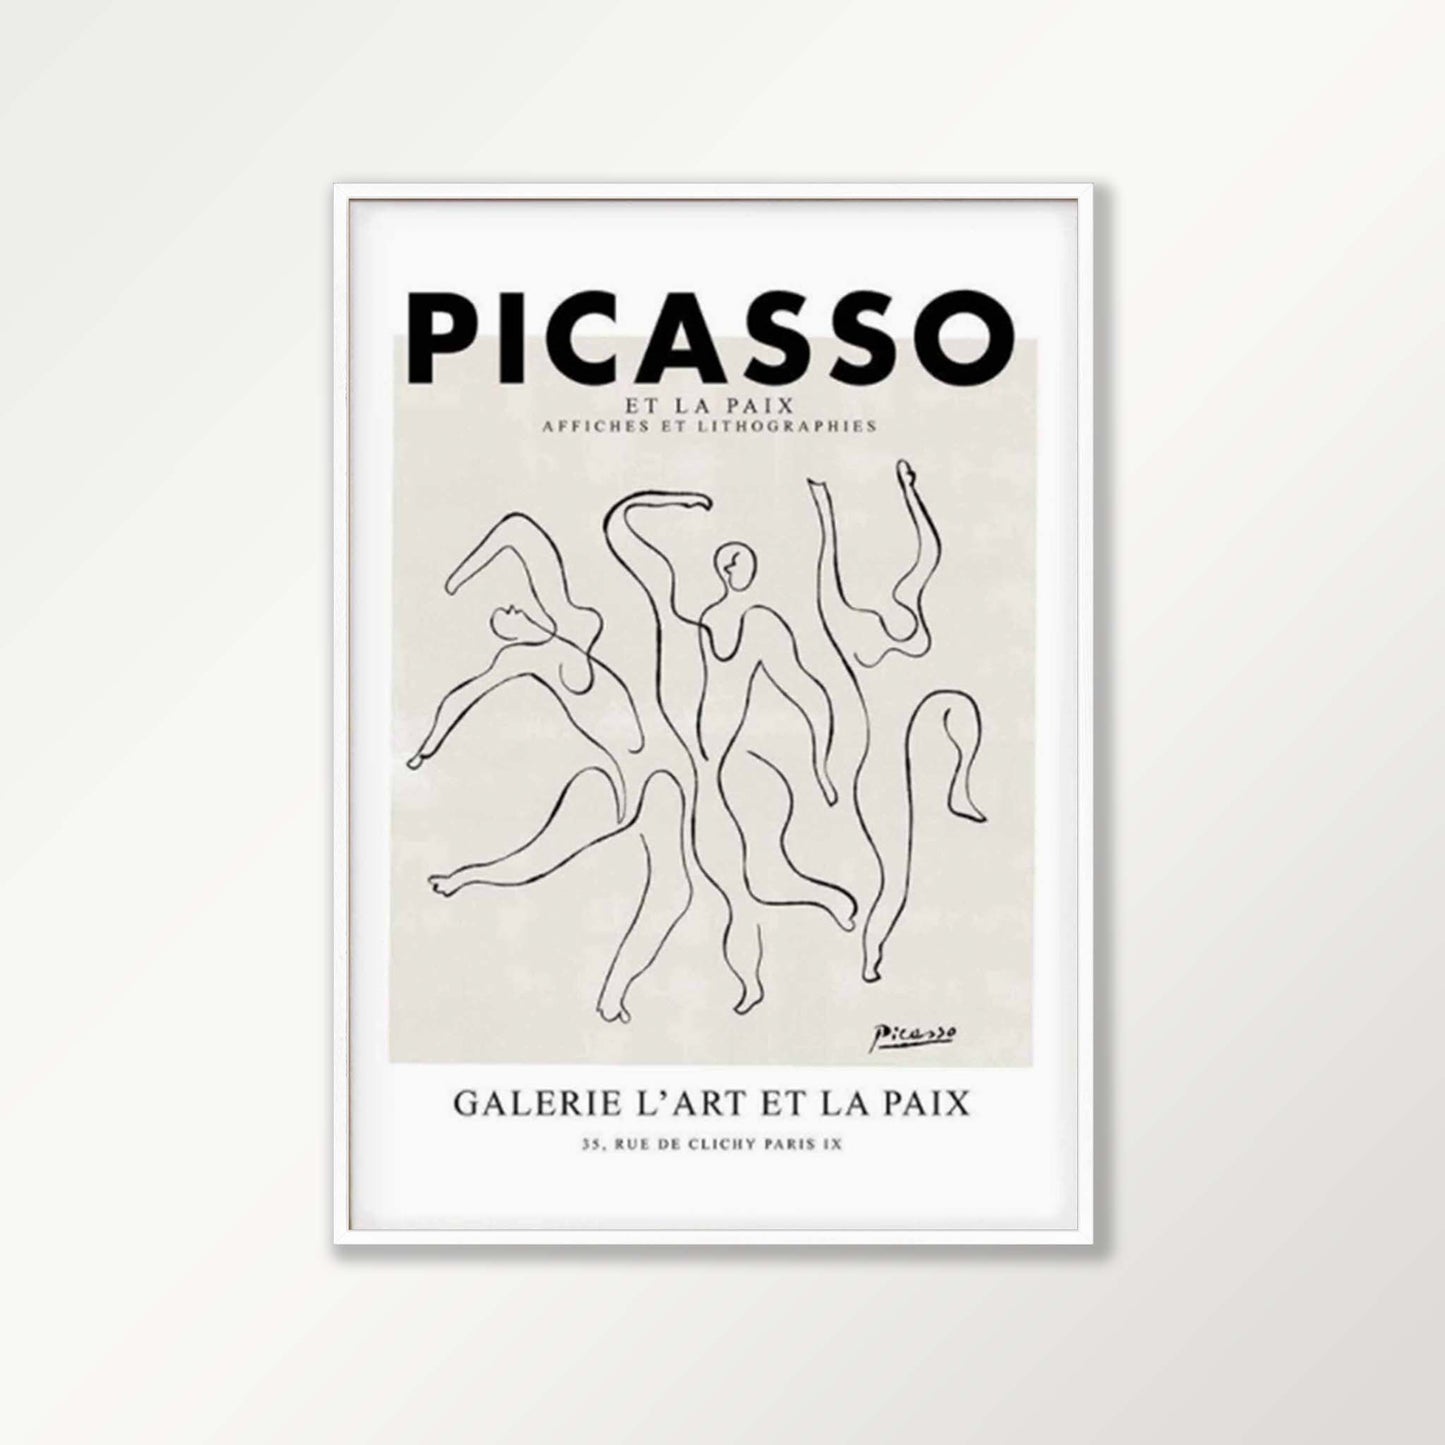 Minimal Exhibition by Pablo Picasso